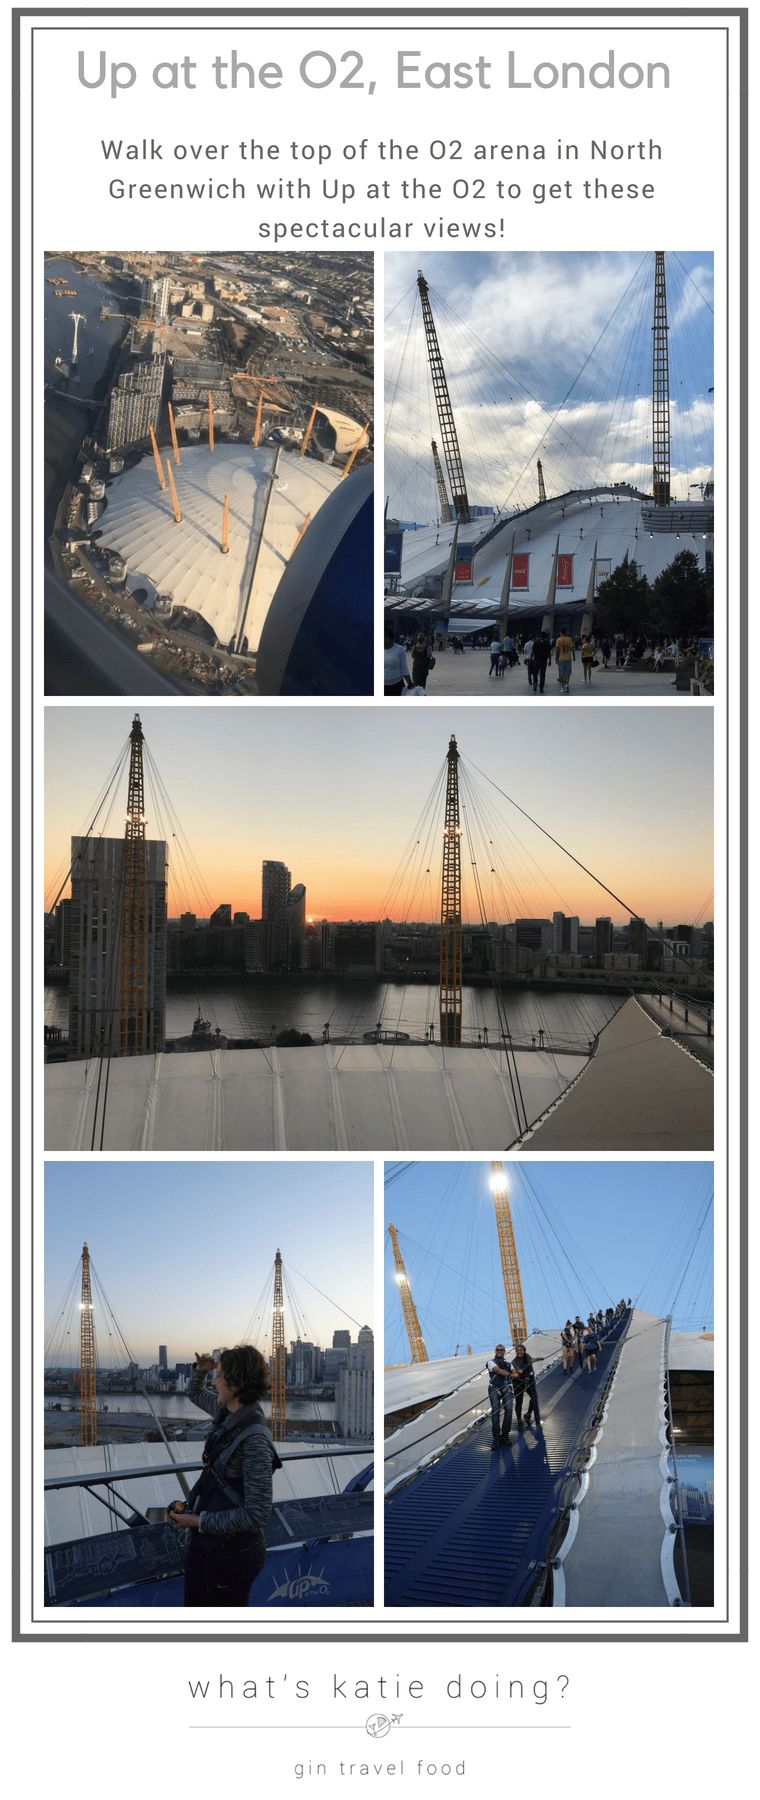 Up at the O2 - walking over the O2 Arena